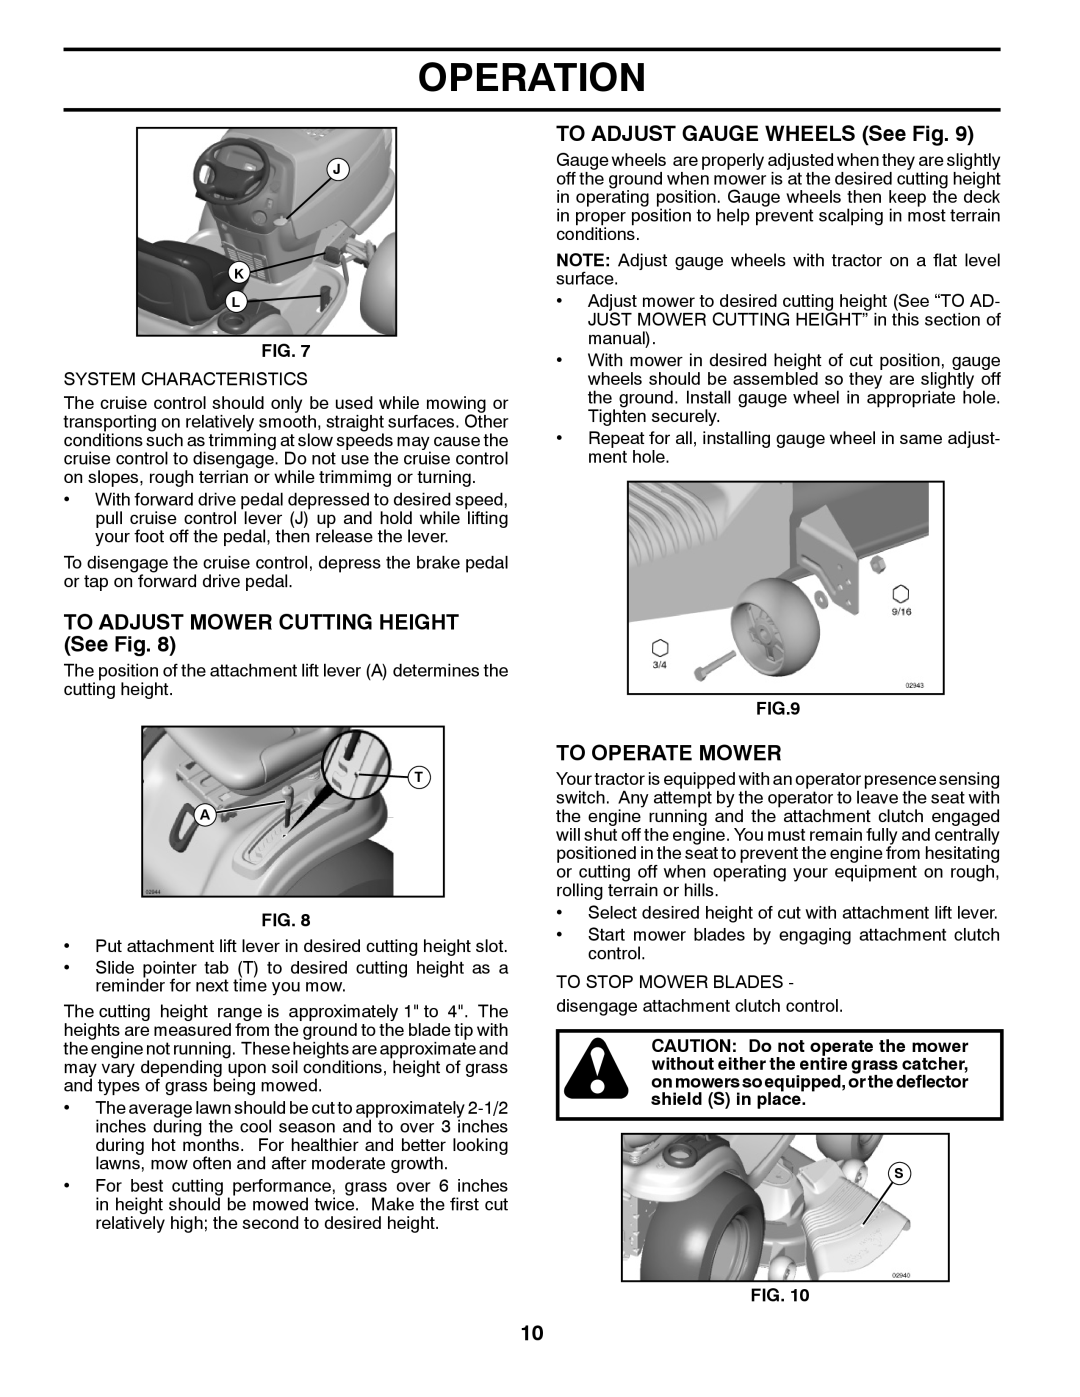 Poulan 412412 manual TO ADJUST MOWER CUTTING HEIGHT See Fig, TO ADJUST GAUGE WHEELS See Fig, To Operate Mower, Operation 